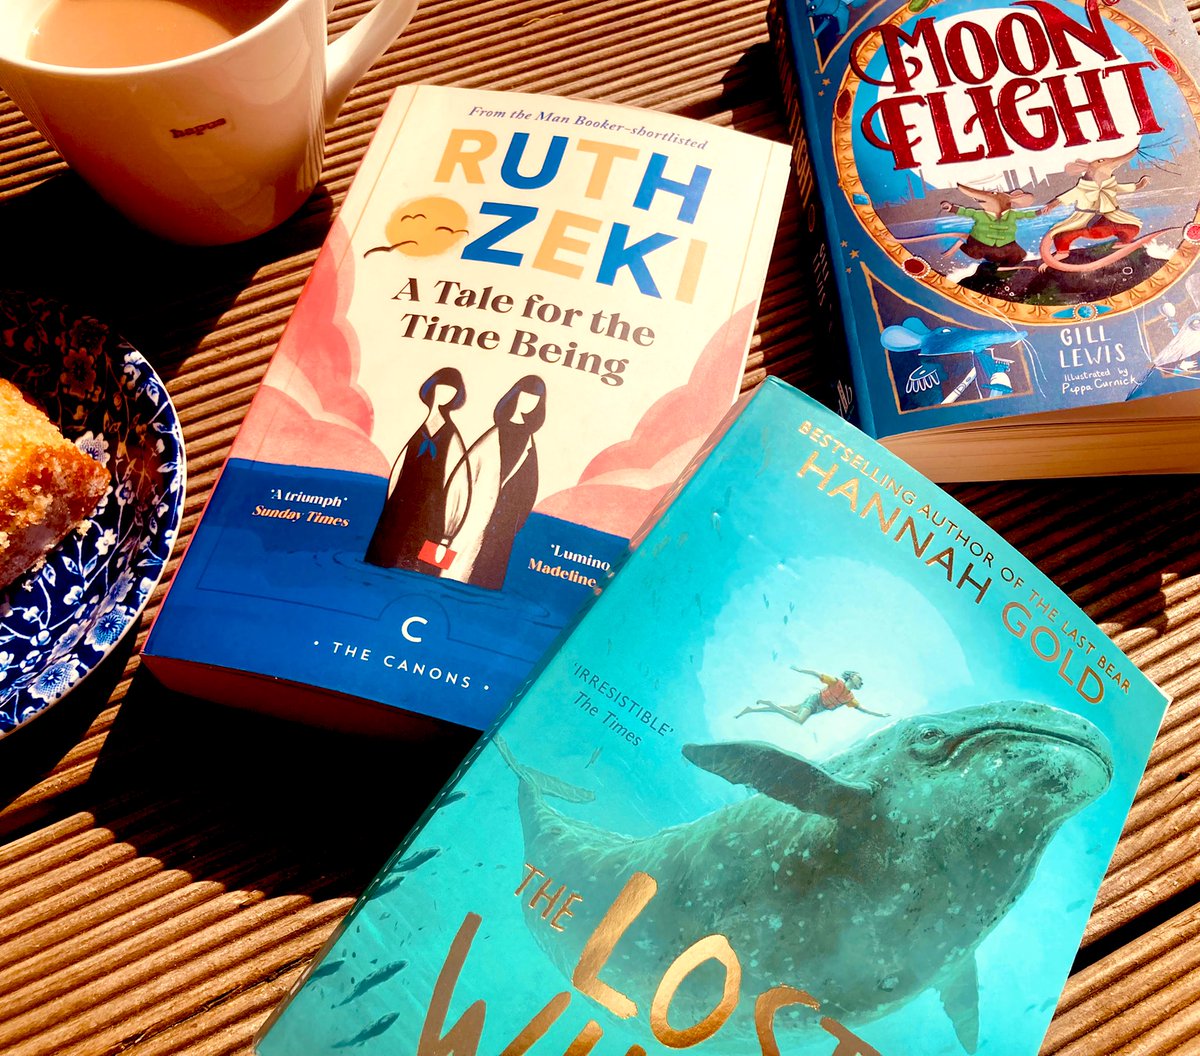 @five_books Sunny in #Pembrokeshire so we’ve been reading in the garden, at the harbour & now at the park. I’m finishing my #BookClub read from @ozekiland #ATaleForTheTimeBeing. Son & I are also reading @HGold_author #TheLostWhale & my daughter wanted me to finish @gill__lewis #MoonFlight 📚